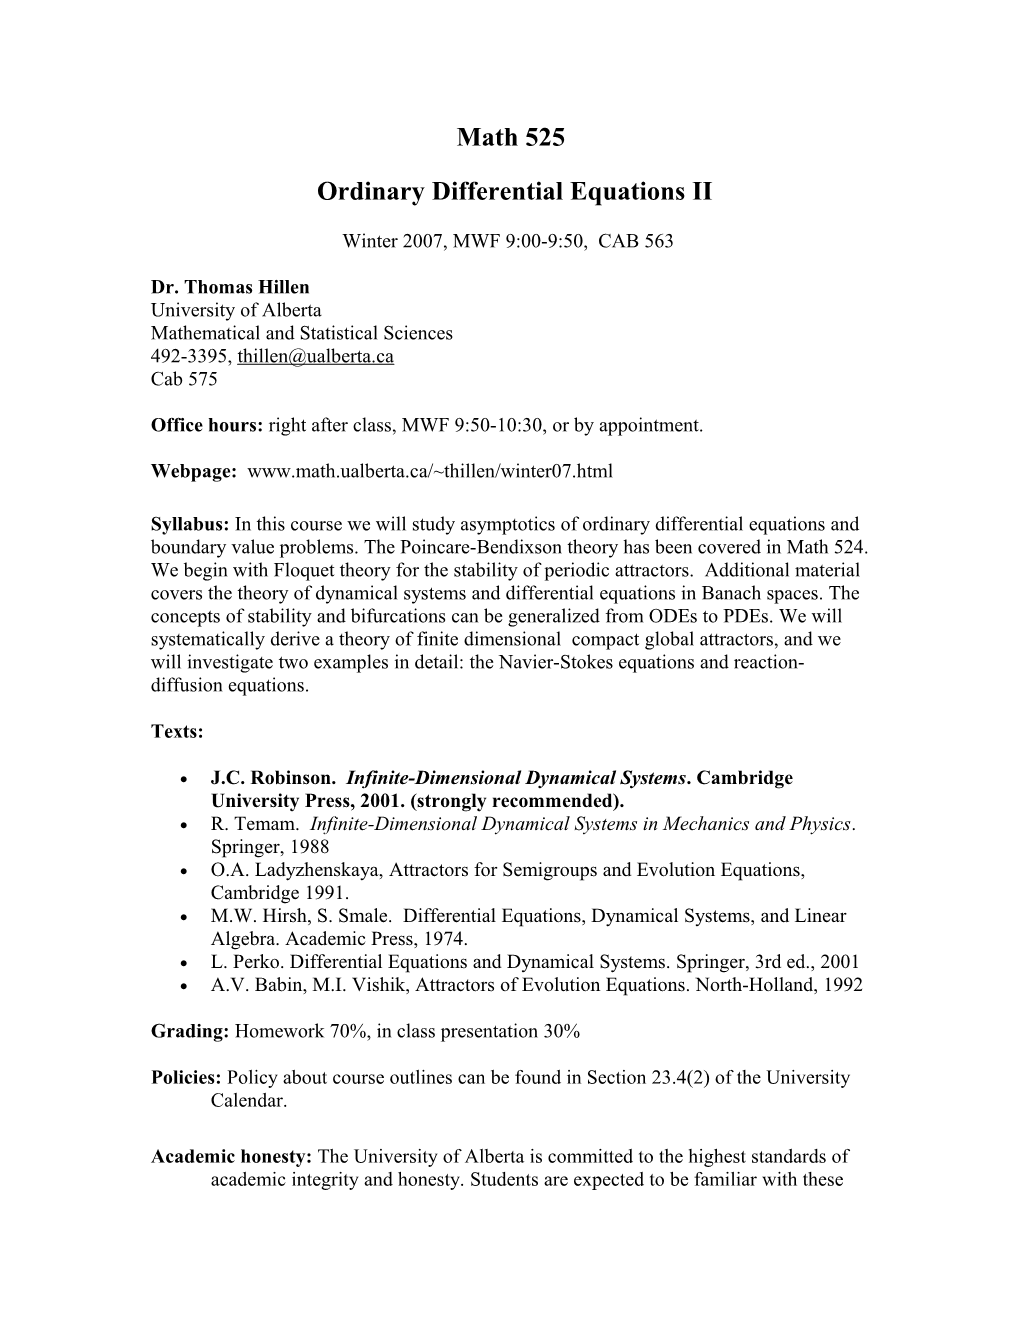 Ordinary Differential Equations II